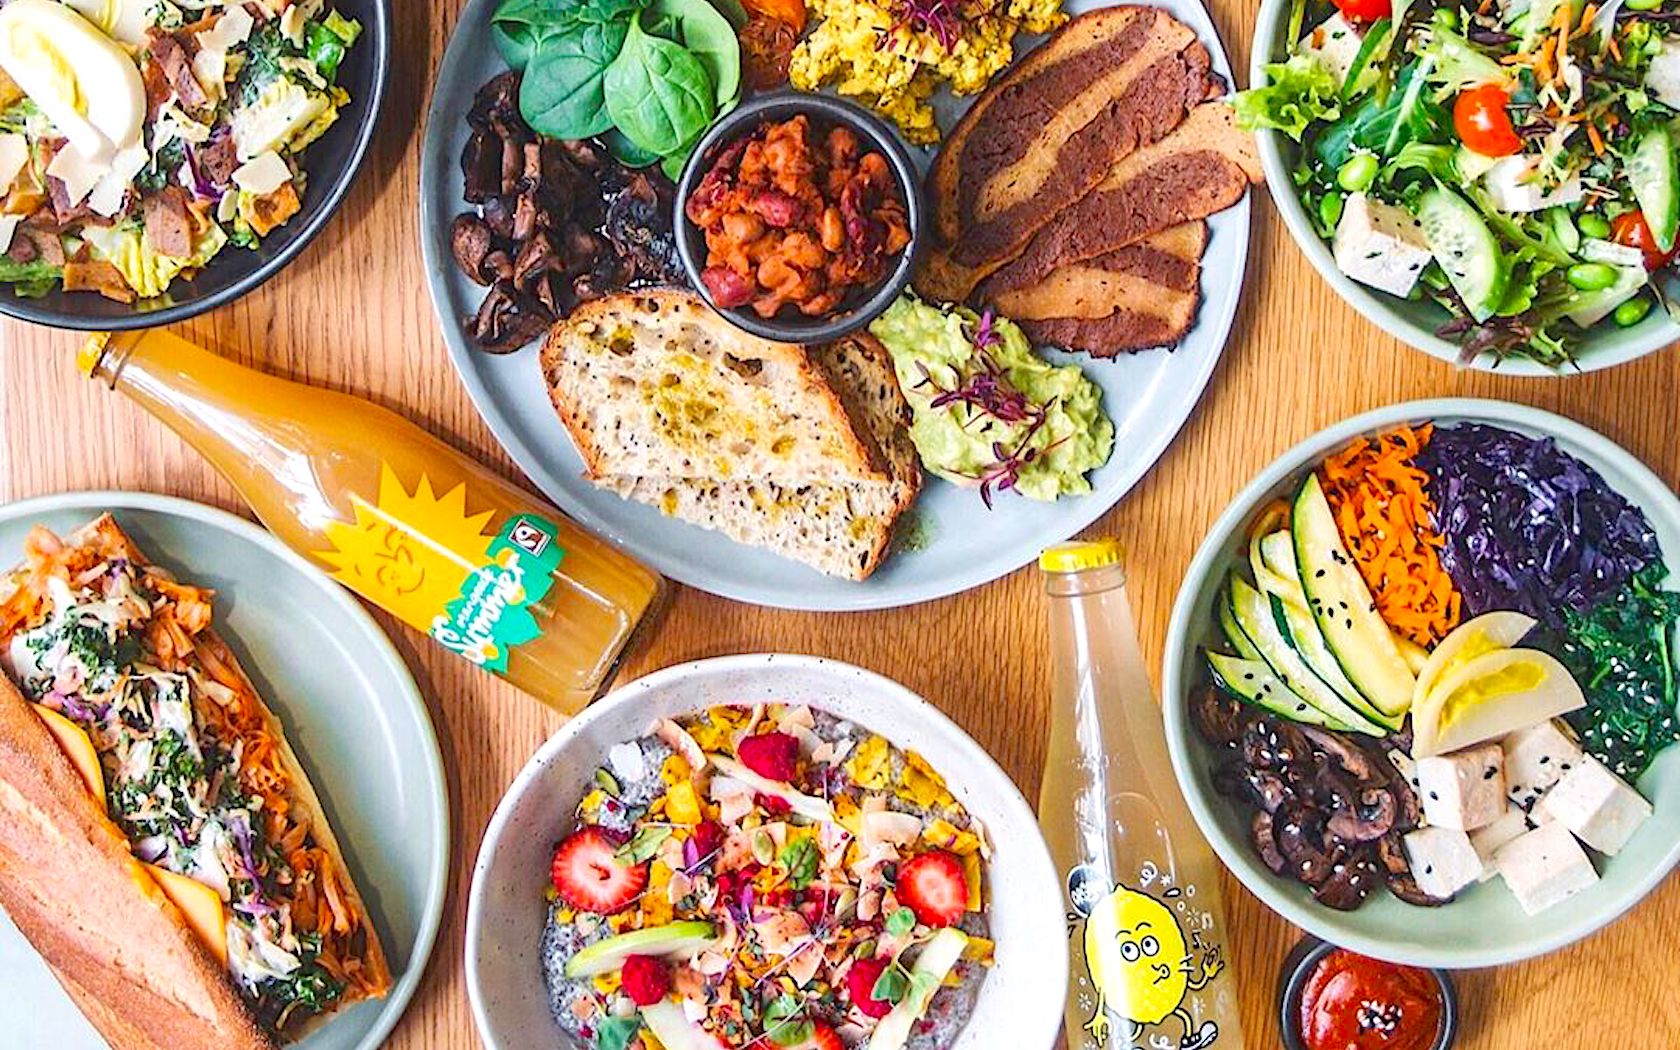 Top Vegan Cities: The Official List Of Vegan Holiday Hotspots Is Here